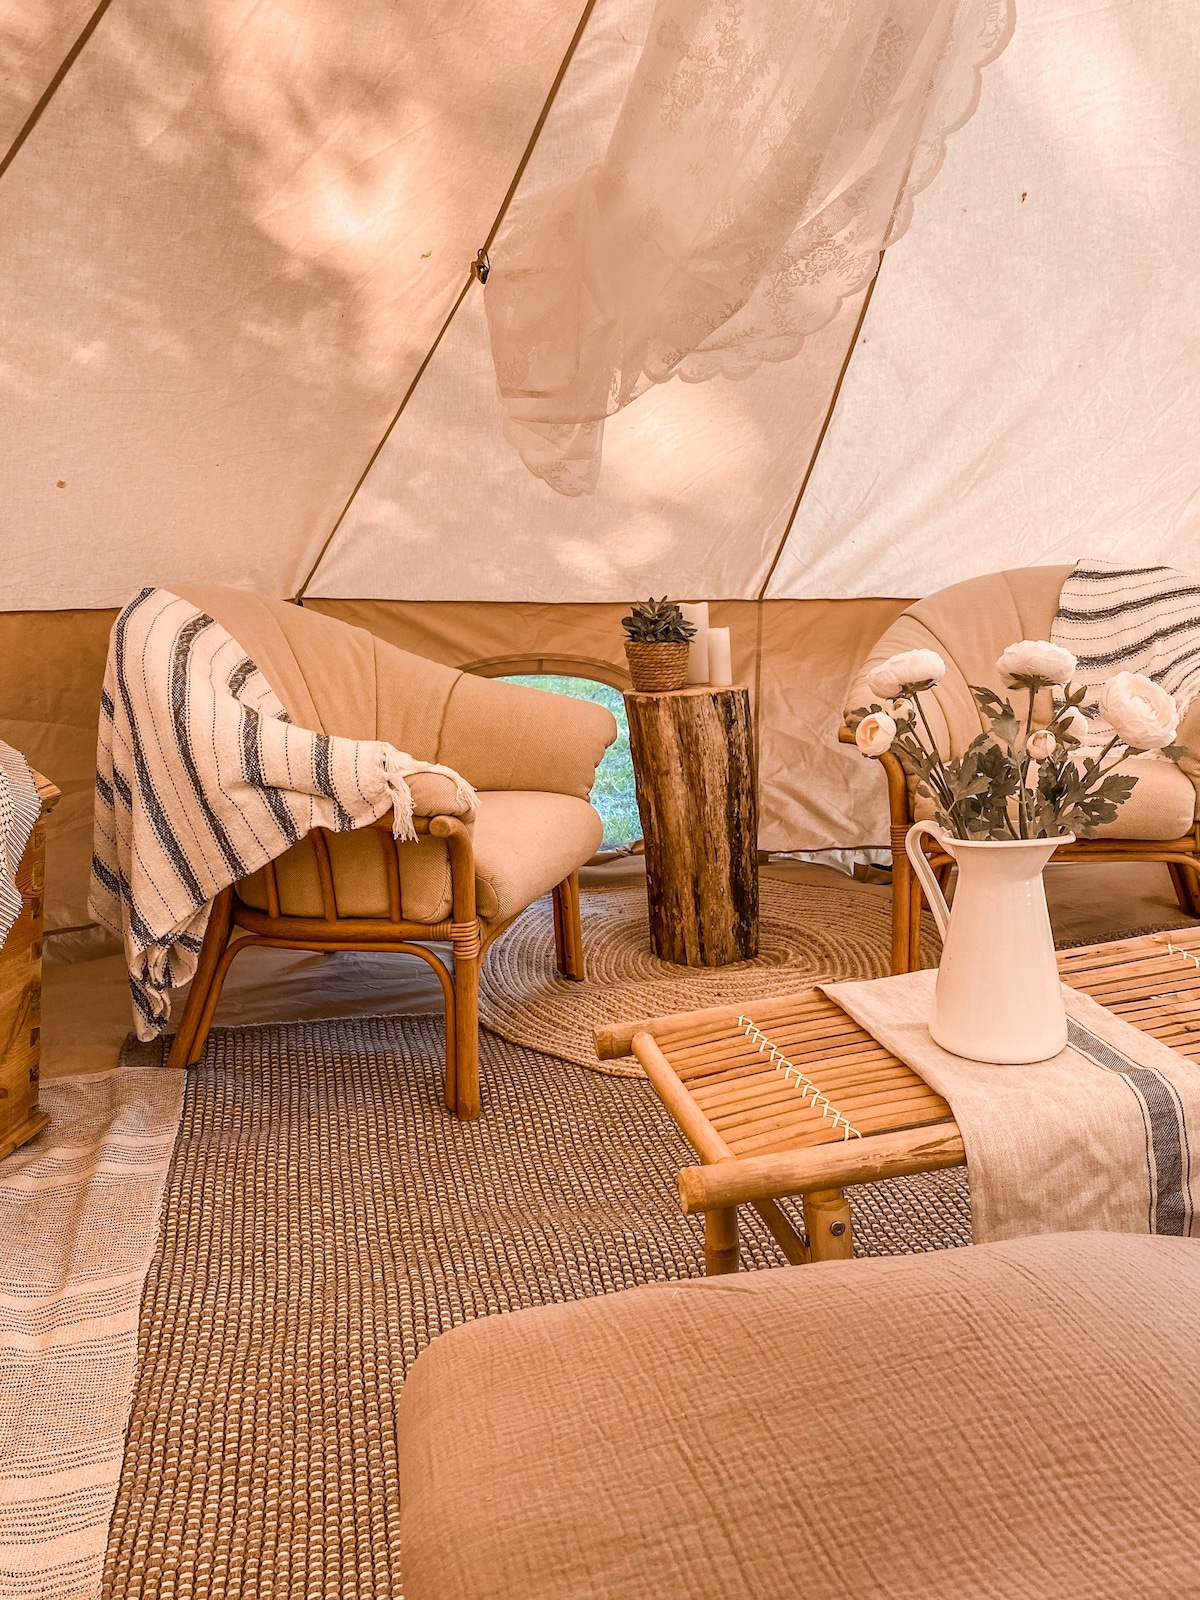 Glamping BohoFYN take away from the busy everyday